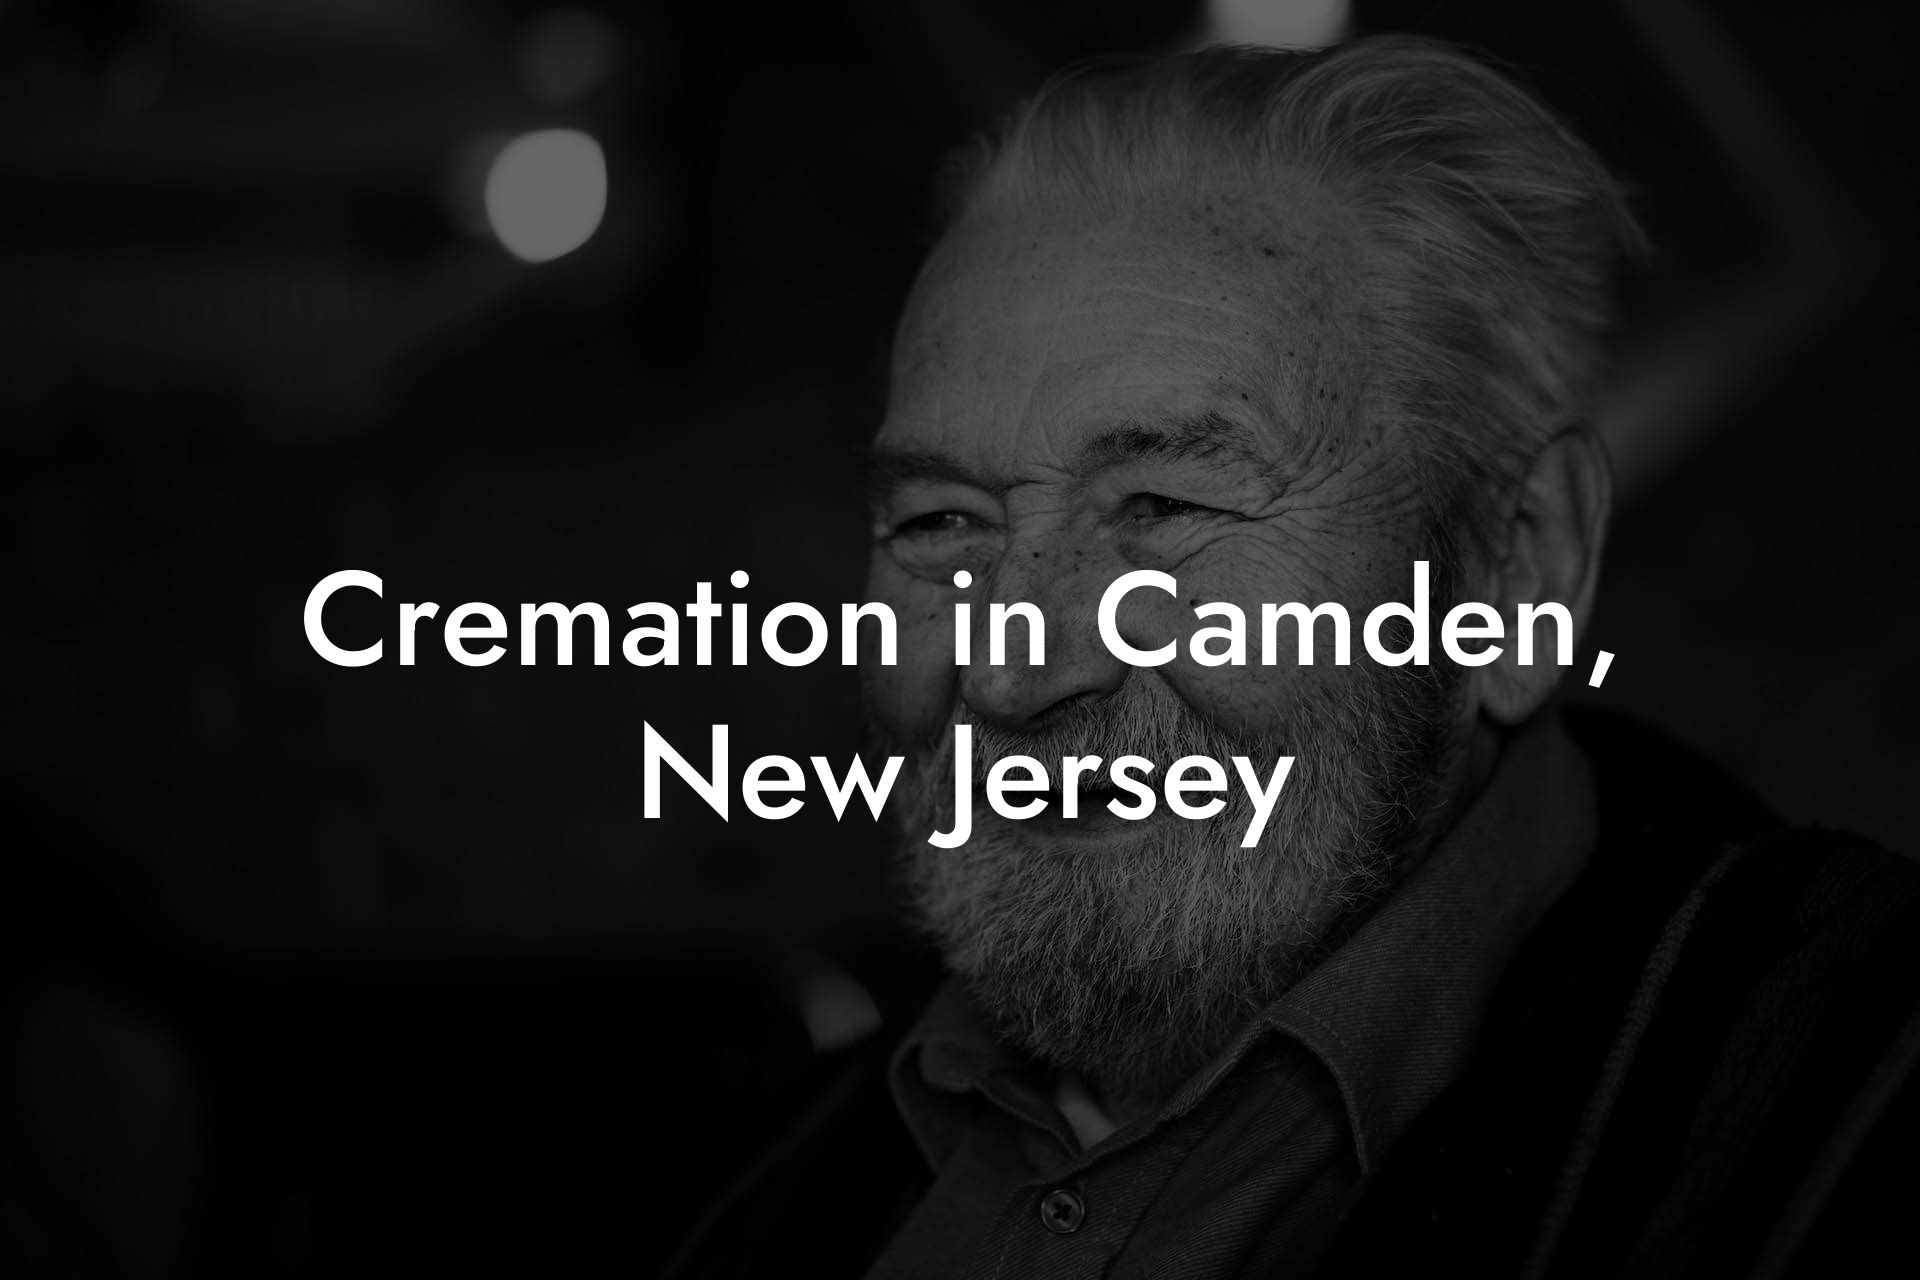 Cremation in Camden, New Jersey